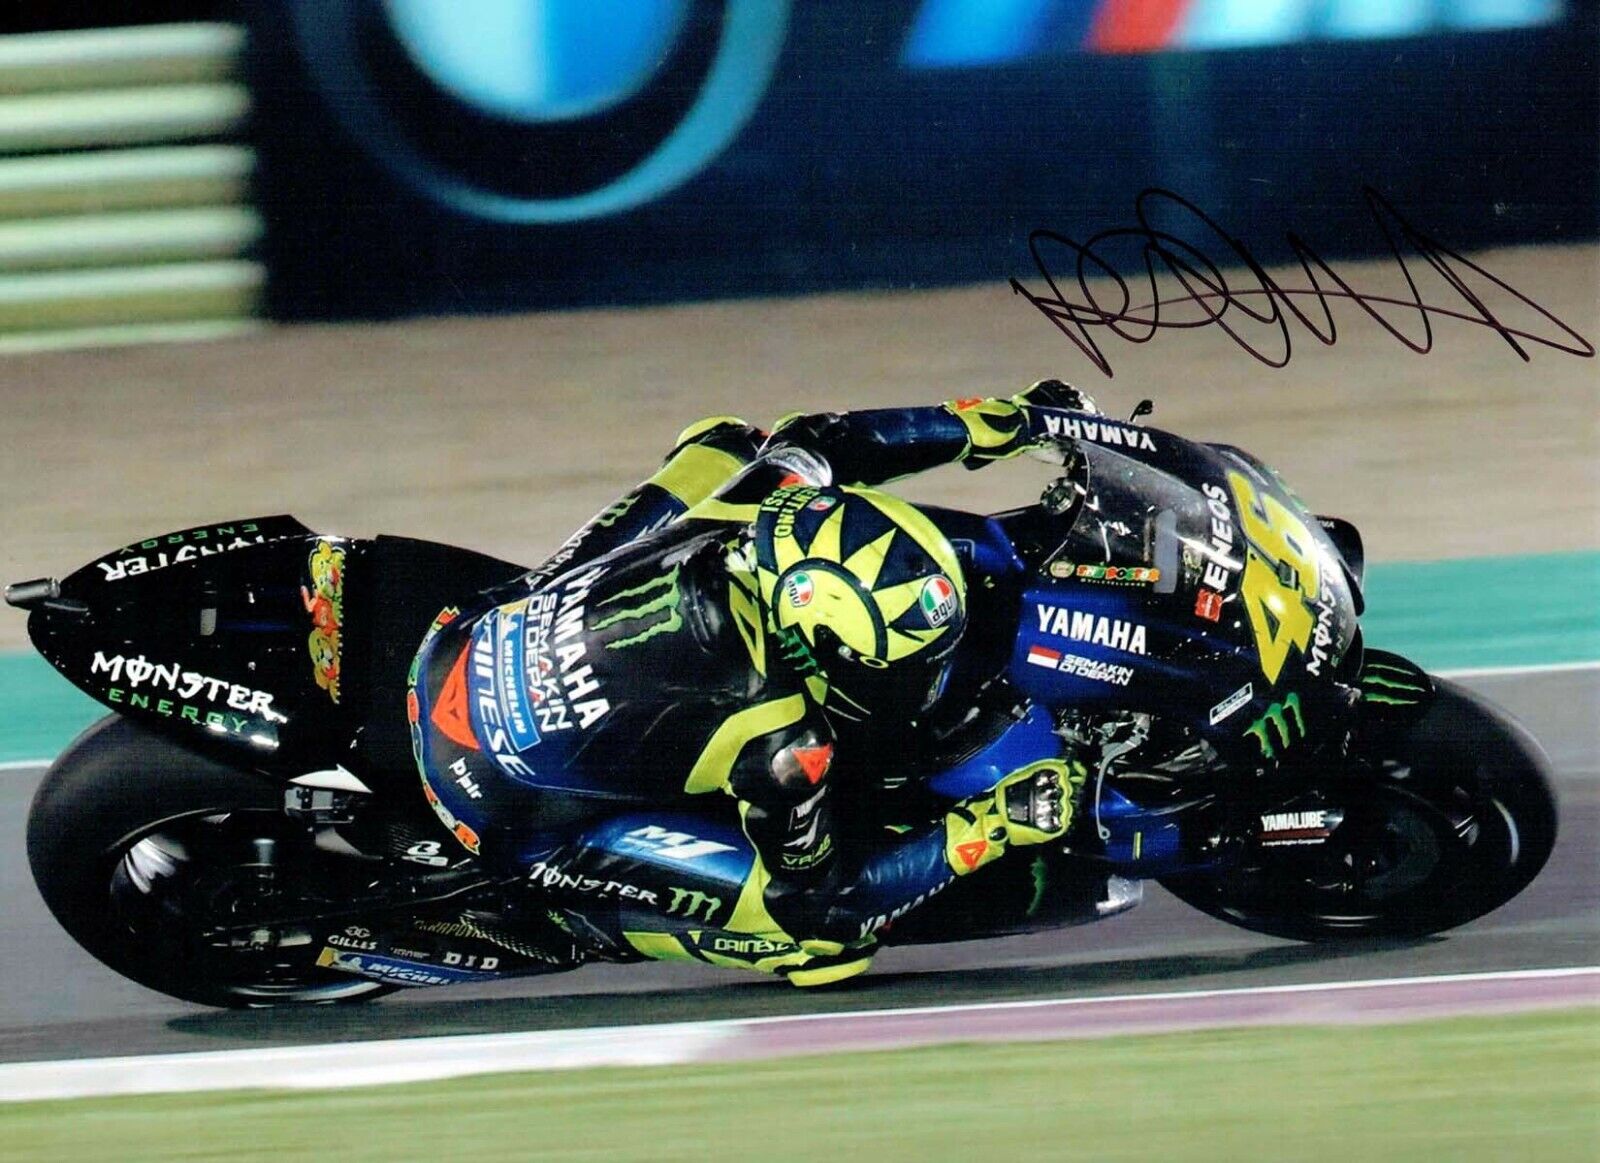 VALENTINO ROSSI Autograph 2019 SIGNED 16x12 Yamaha Photo Poster painting 8 AFTAL COA VR46 Vale